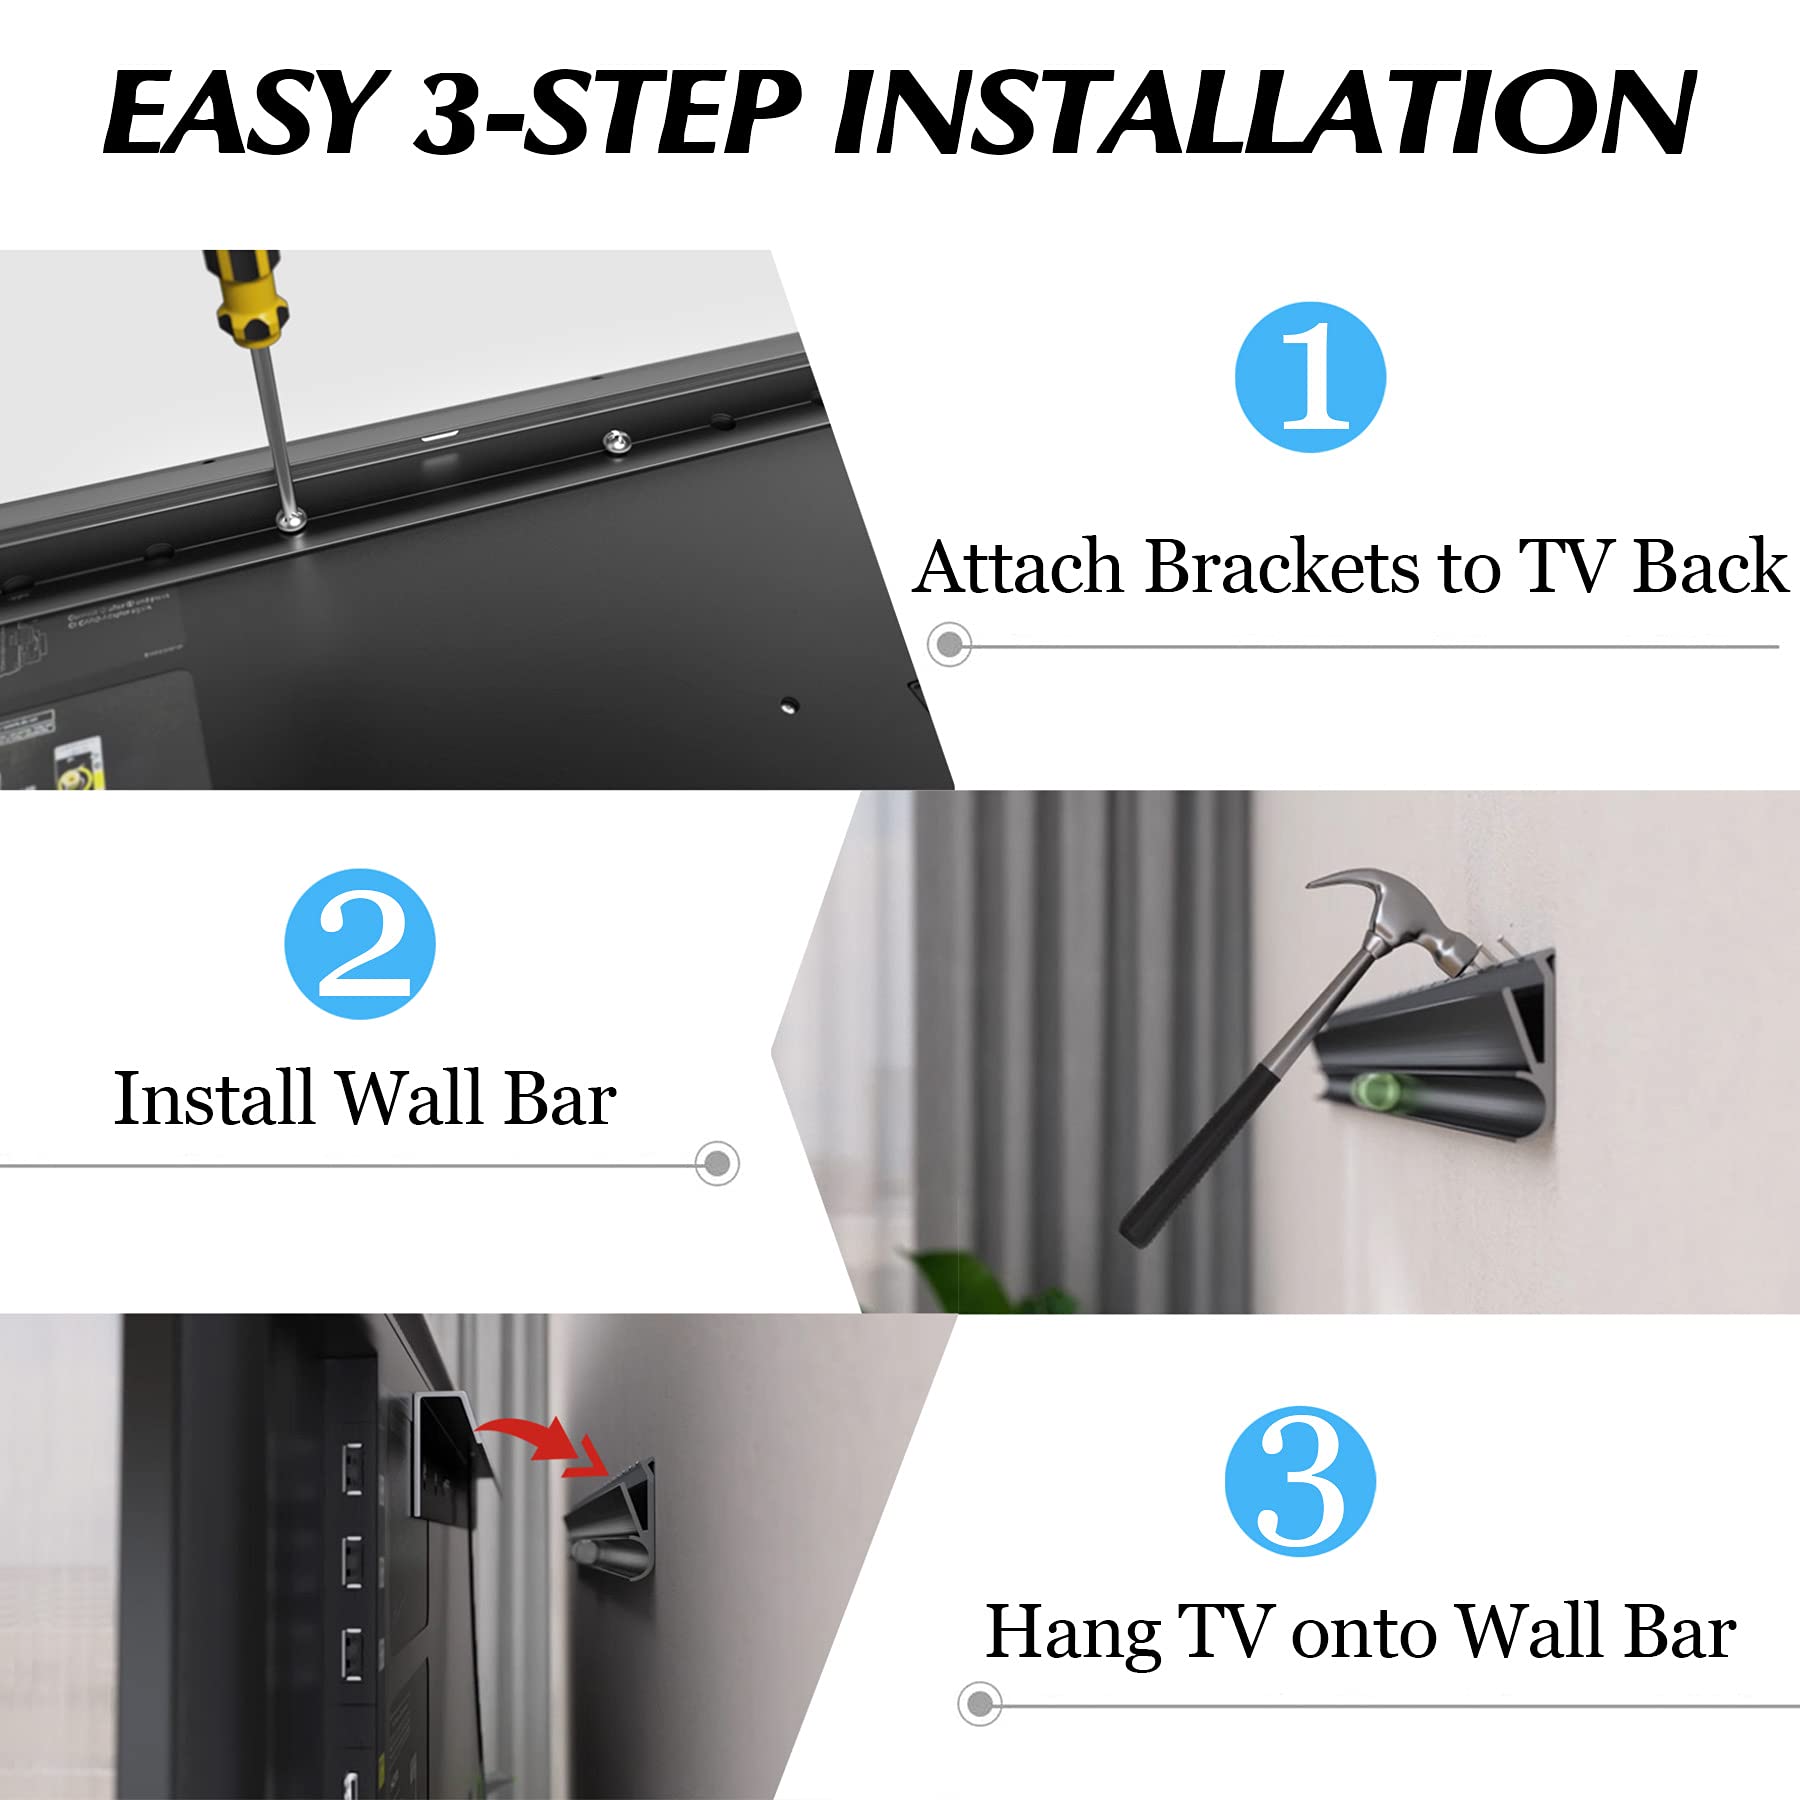 No Stud TV Wall Mount, Drywall Studless TV Hanger No Damage, No Drill, Non Screws, Flat Screen Easy Install Bar Bracket fits VESA 12-55 inch TVs up to 99 lbs, Include Hardware Levels